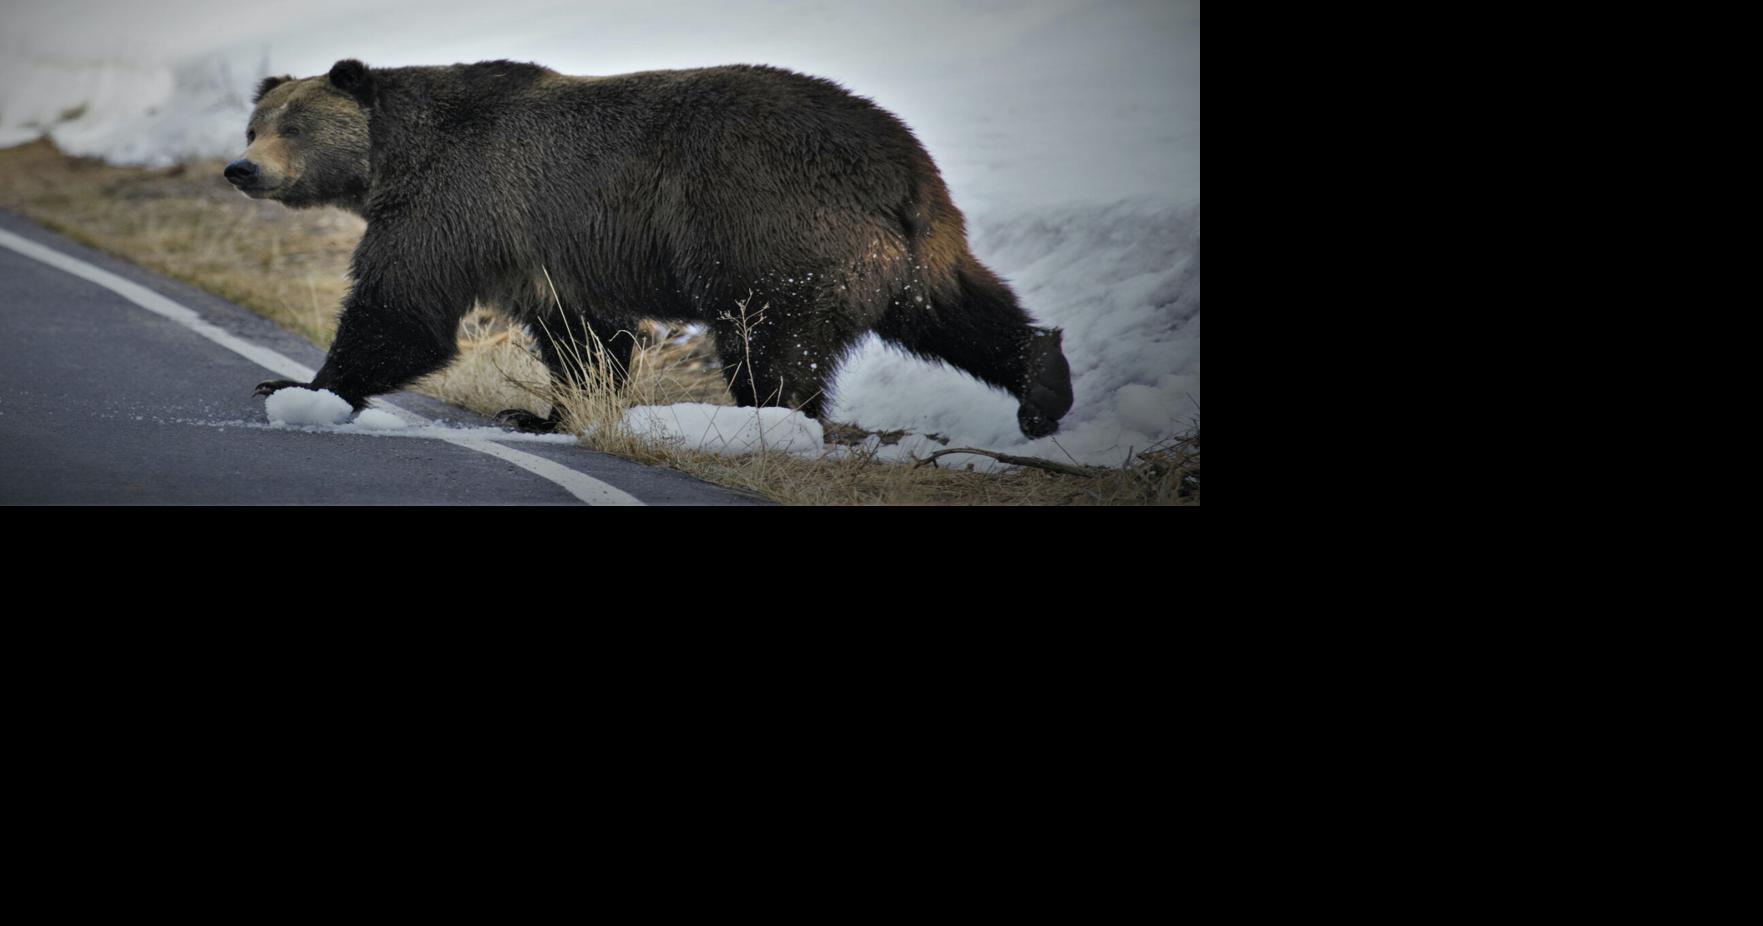 Hunters report concerning uptick in grizzly bear sightings: 'Something  pretty big is going on and we don't know why